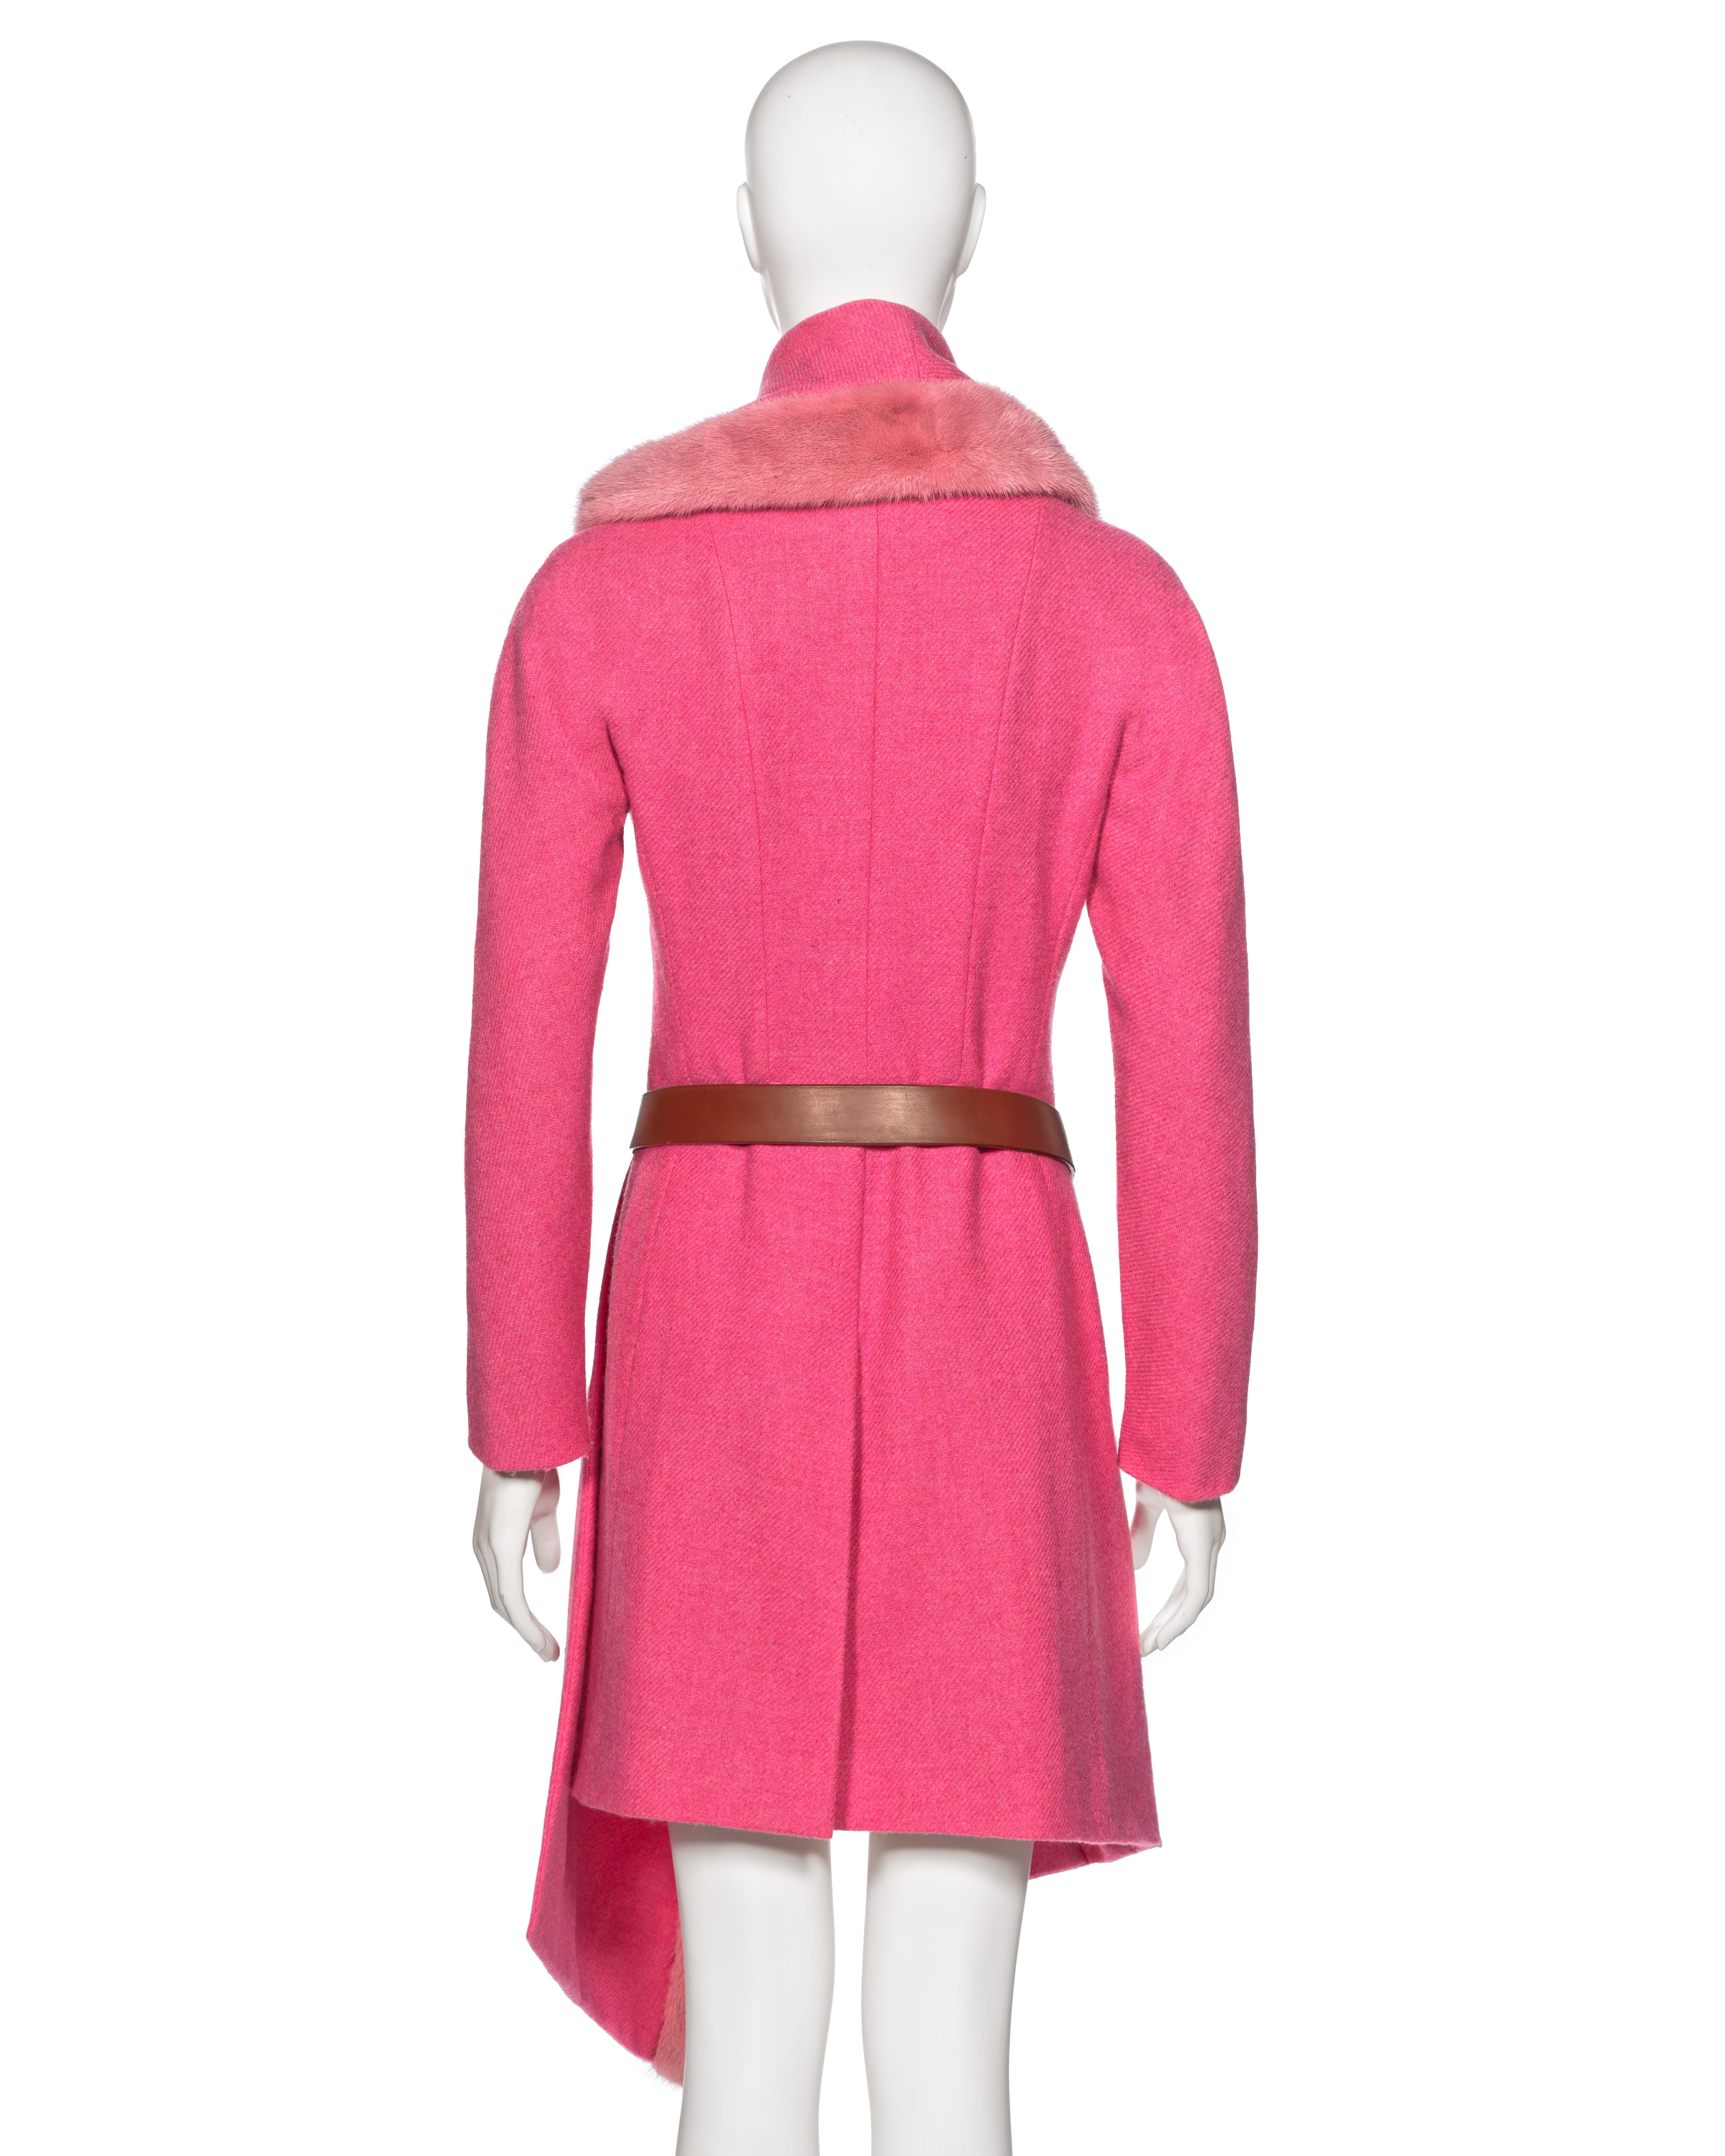 Christian Dior by John Galliano Pink Tweed Coat With Mink Fur Collar, fw 1998 For Sale 5